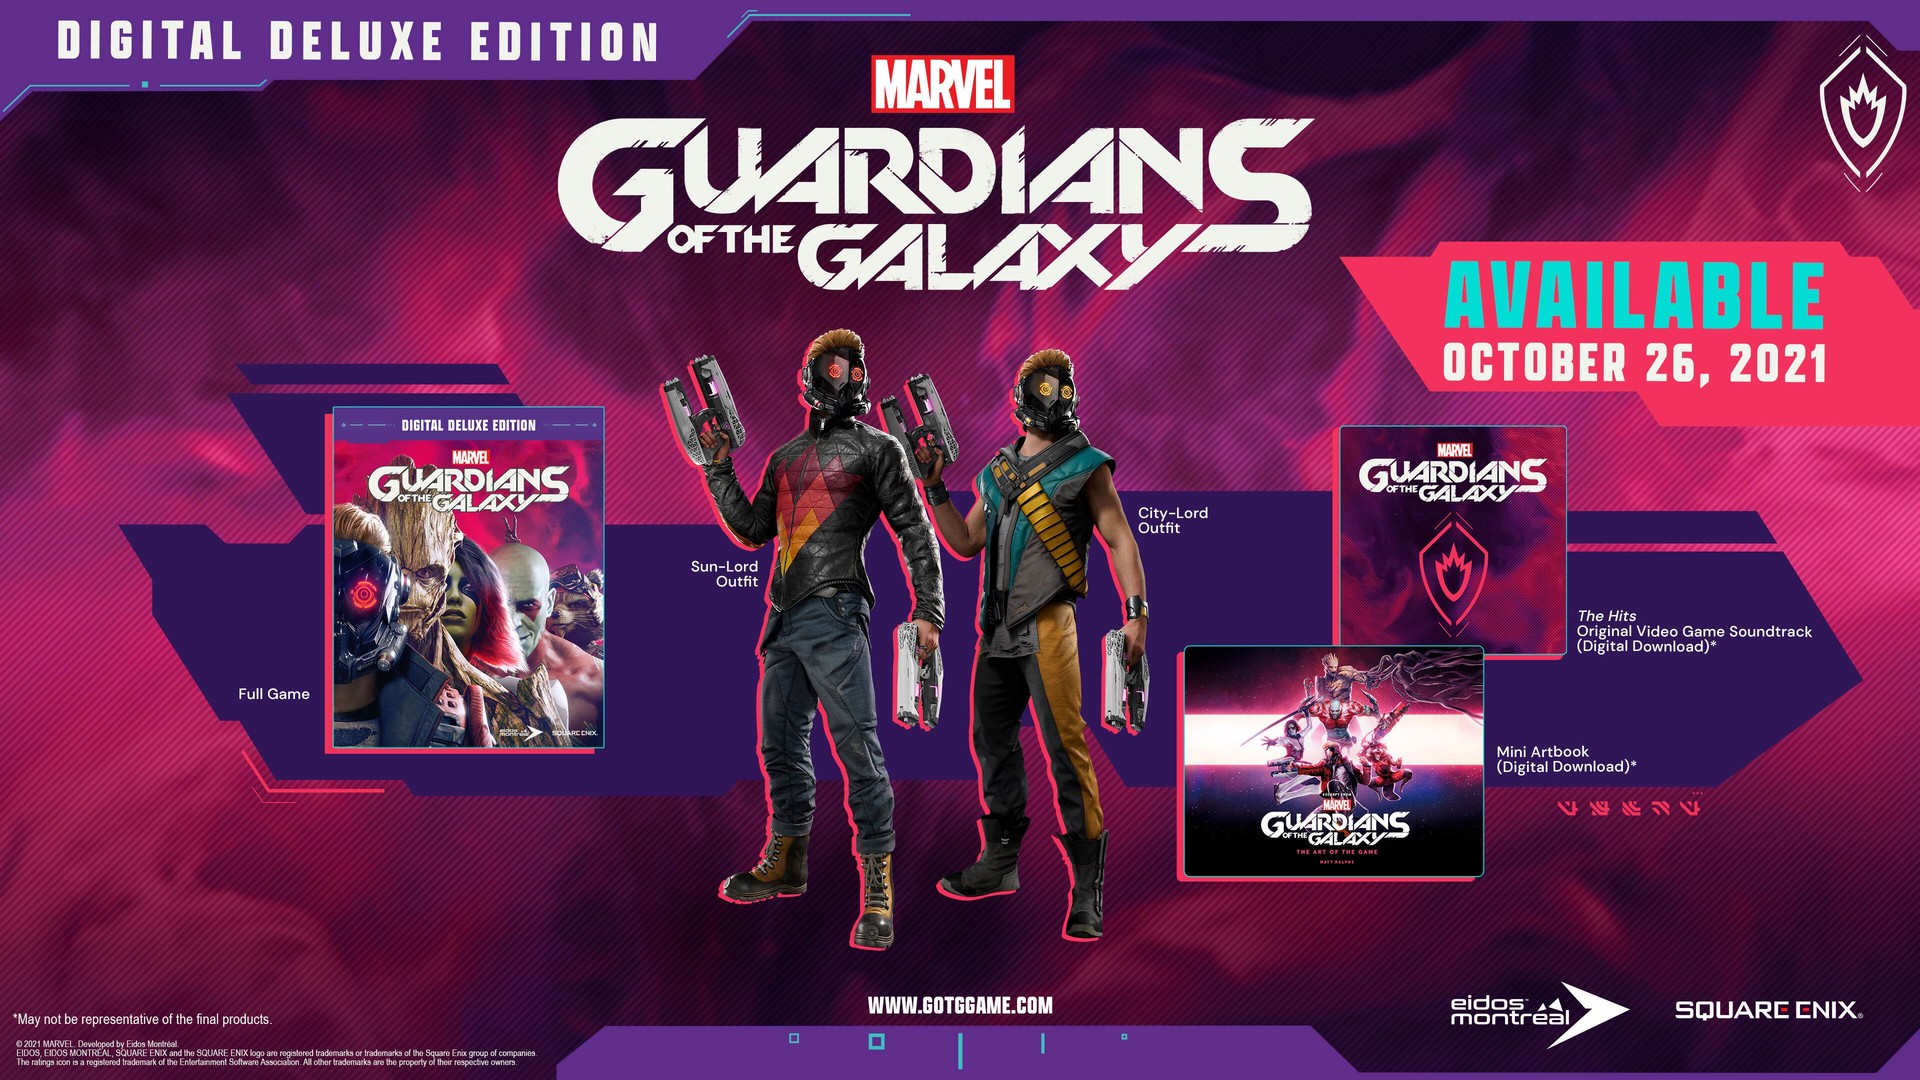 Marvel's Guardians Of The Galaxy Steam Altergift